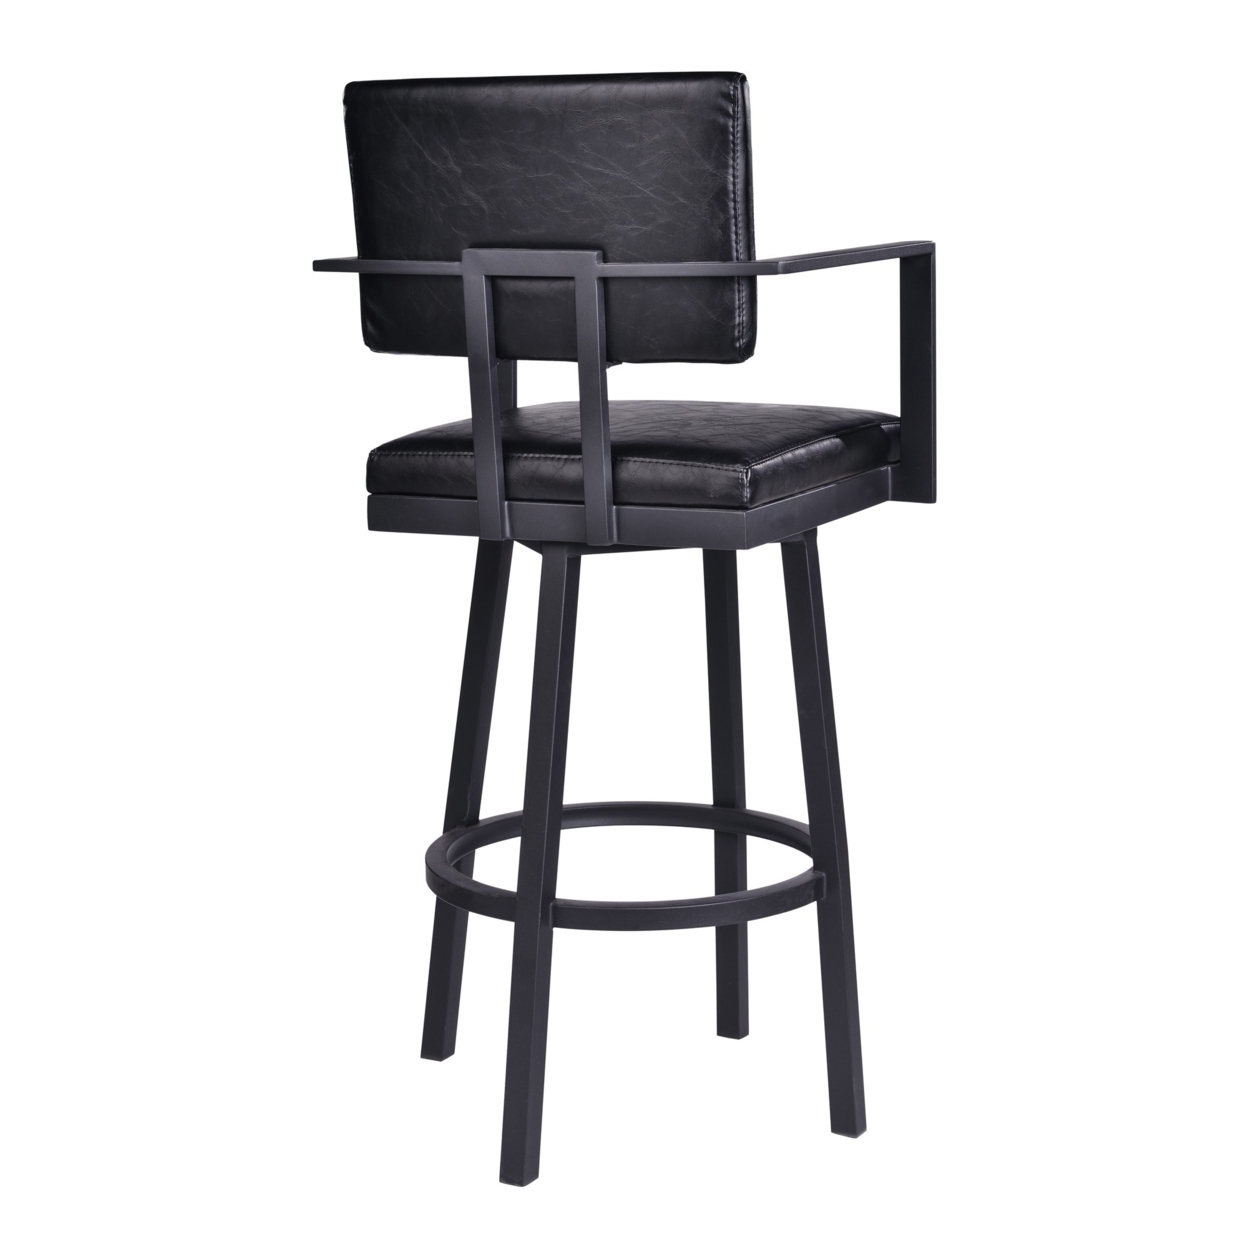 Lumbar Back Faux Leather Barstool With Stainless Steel Legs And Arms, Black- Saltoro Sherpi